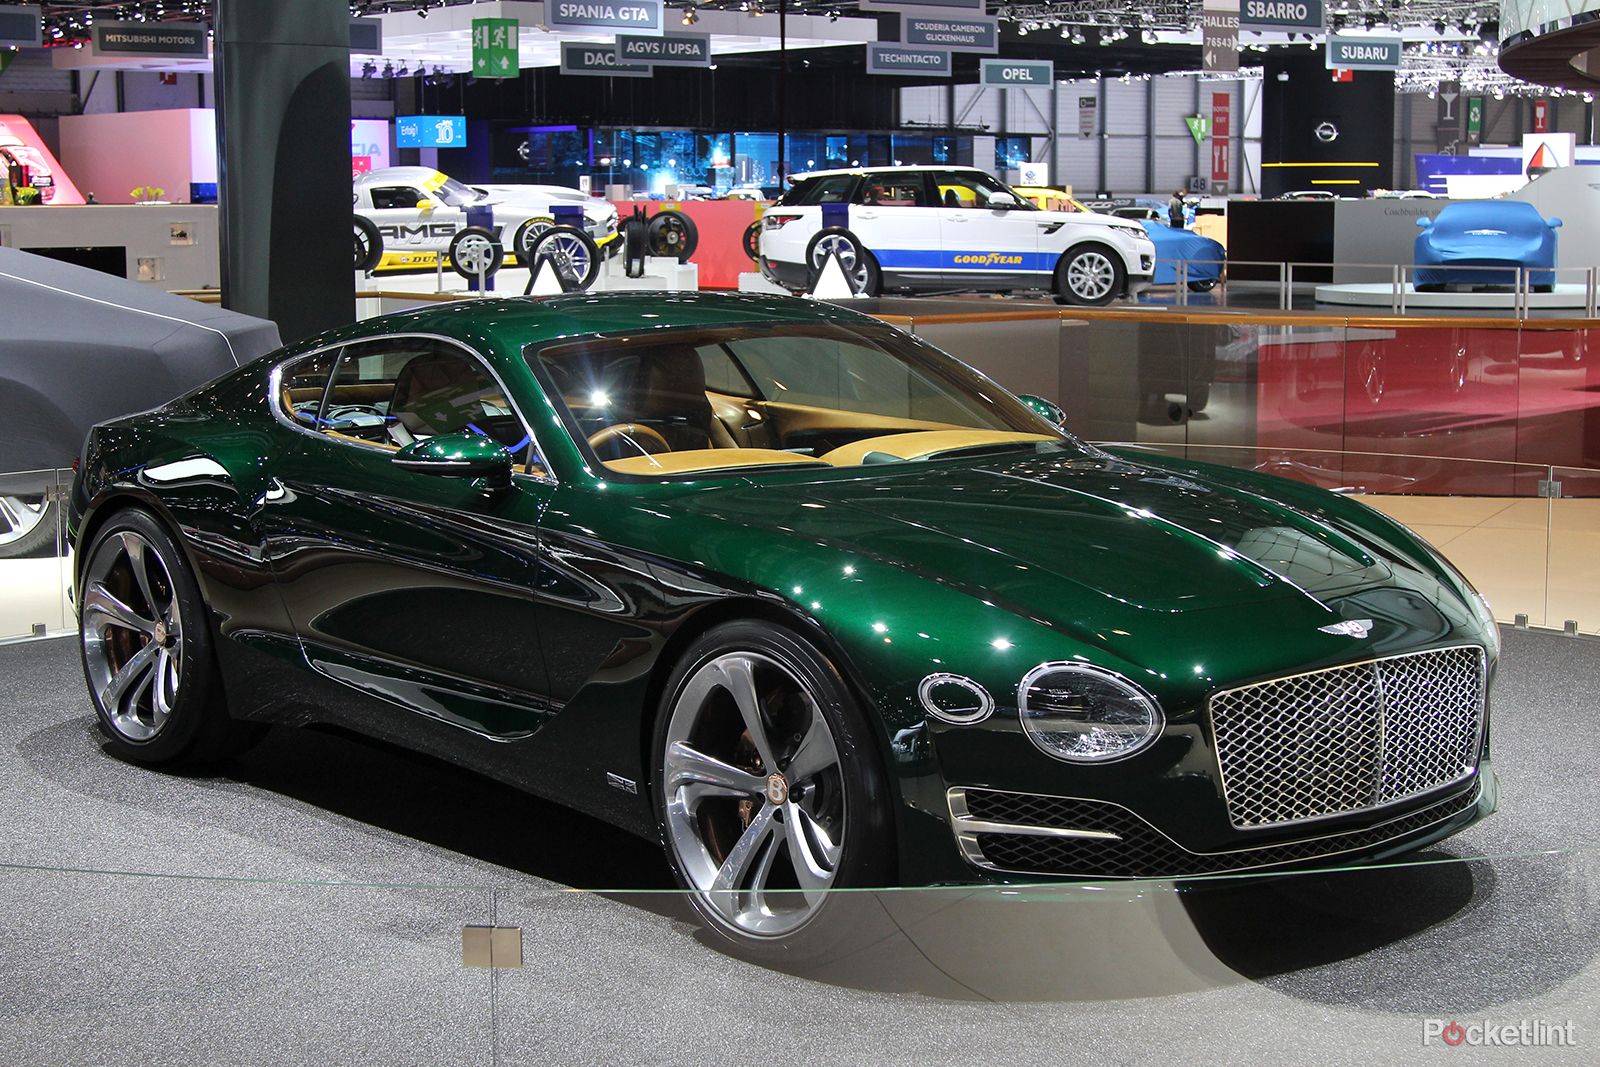 bentley exp 10 speed 6 concept old and new collide in explosive design image 1